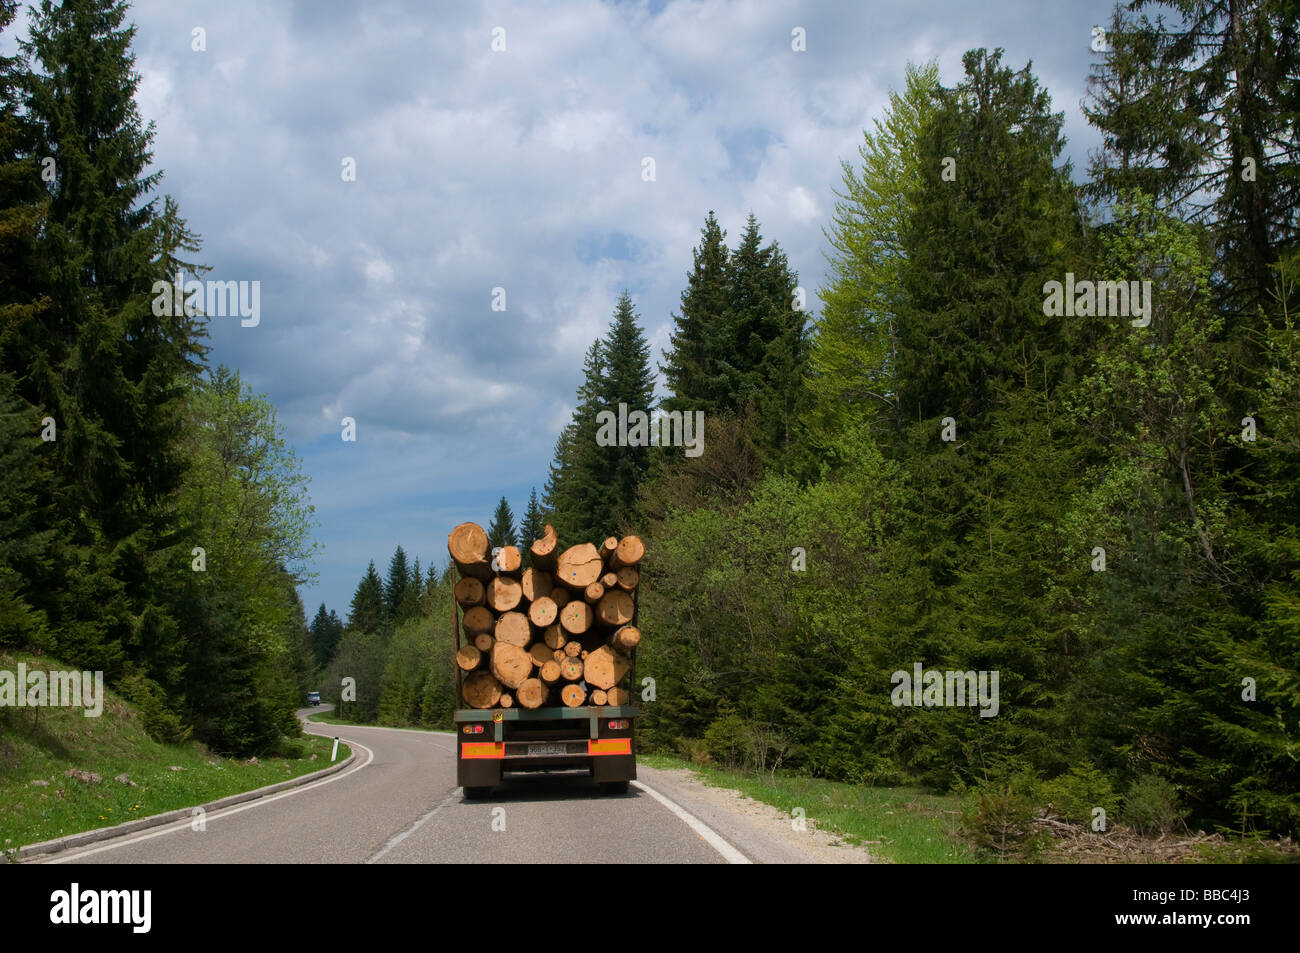 A truck carrying pile of trunks of cut trees in a motorway in Republika Srpska, an entity of Bosnia and Herzegovina Stock Photo